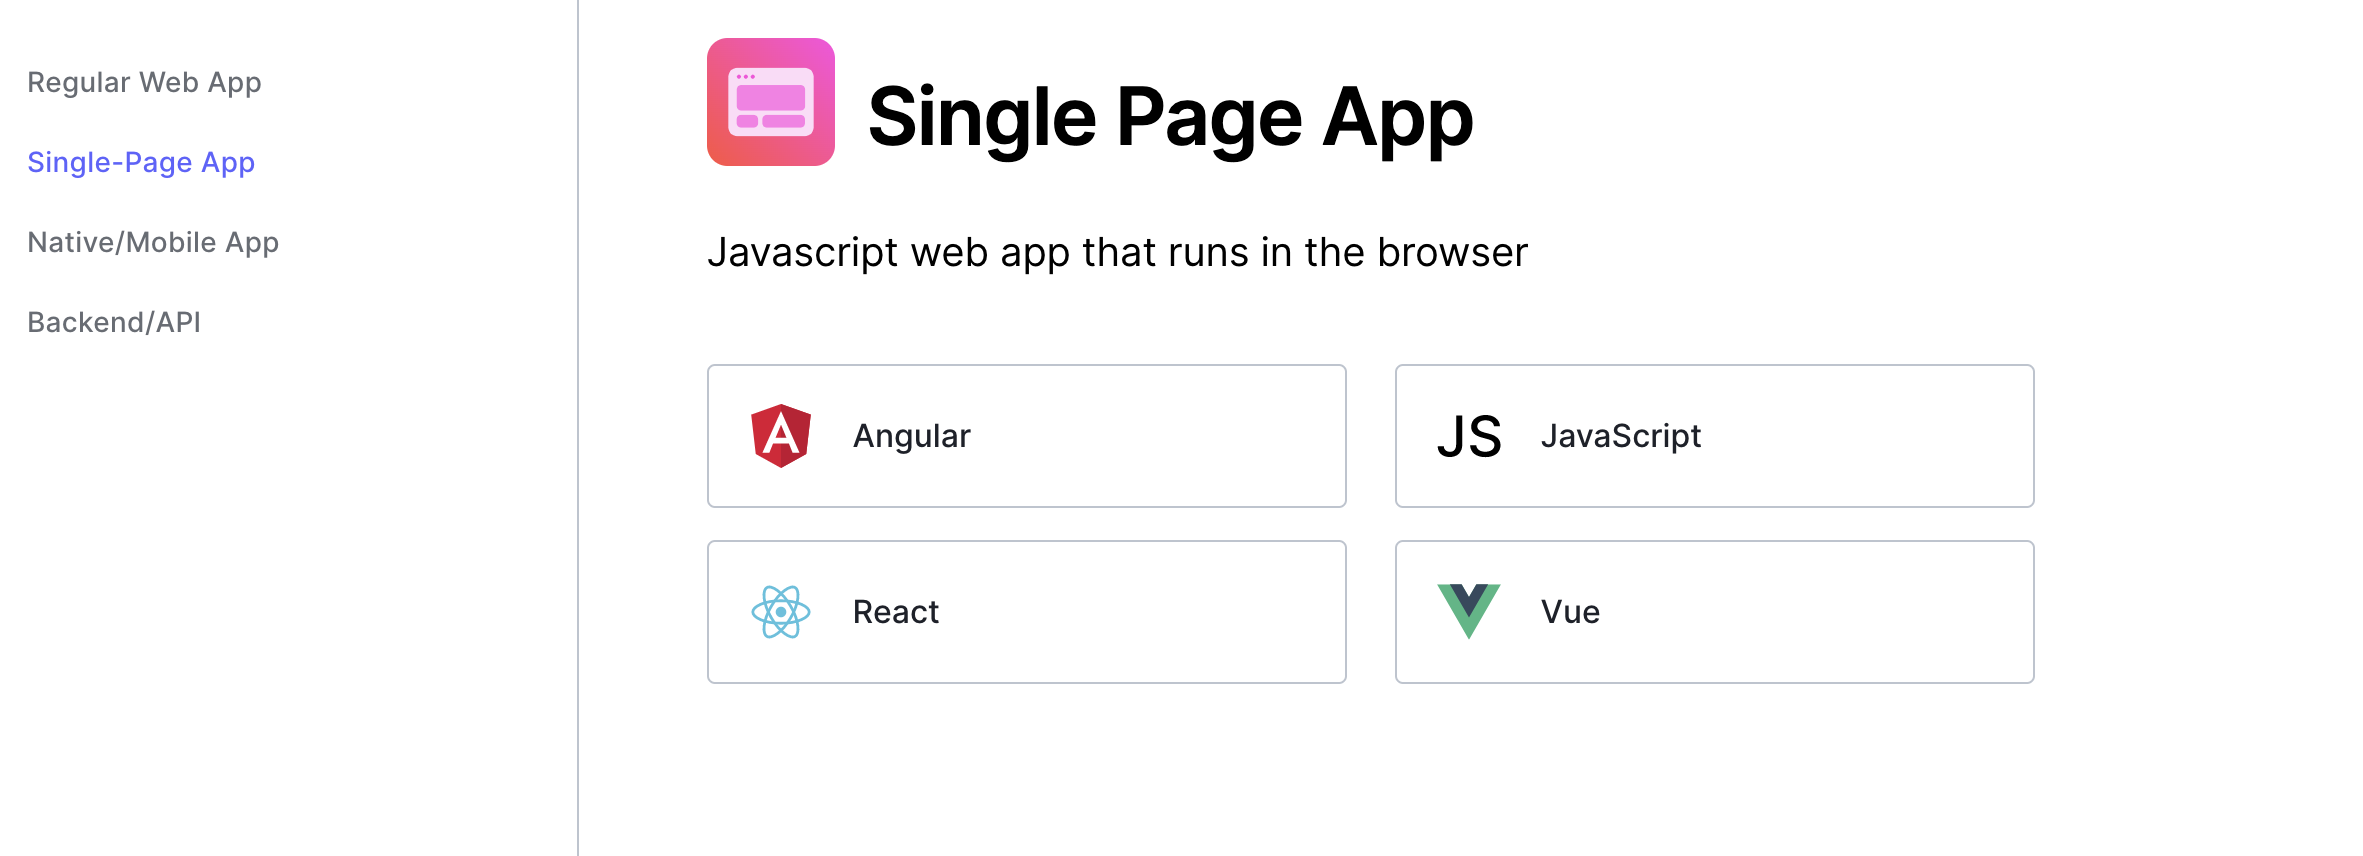 screenshot of page displaying a grid of SPA web app options including Angular, React, JS, and Vue